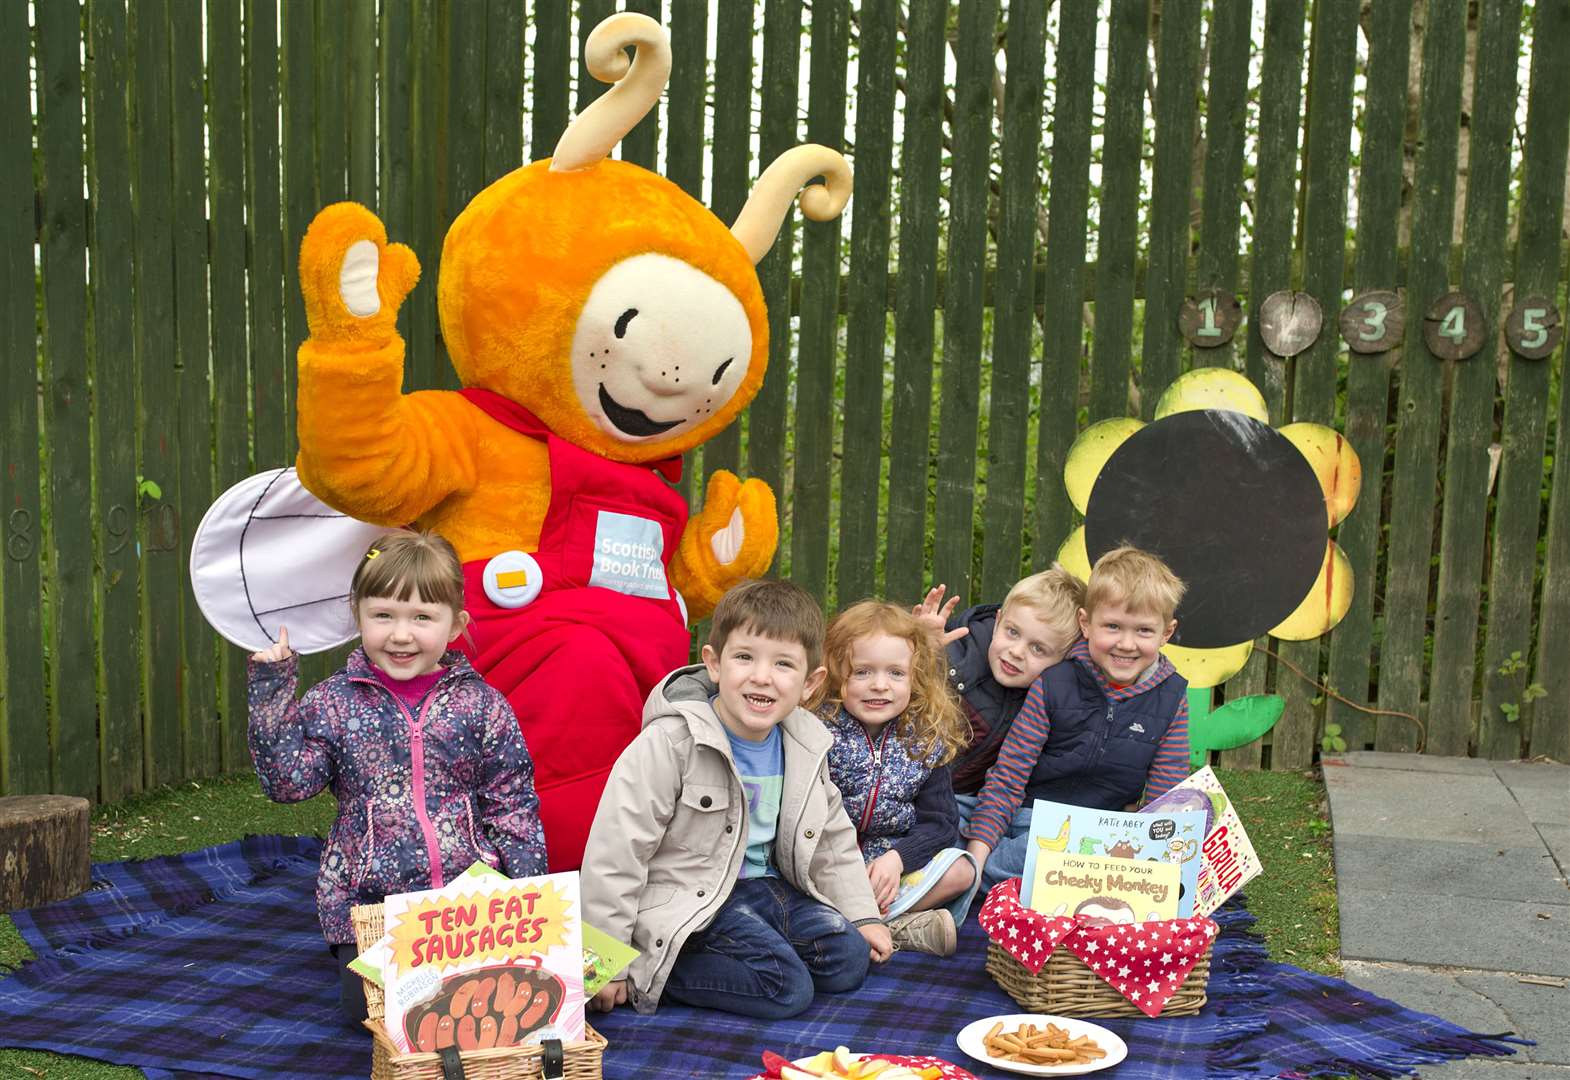 Free events in Inverness for Bookbug Week